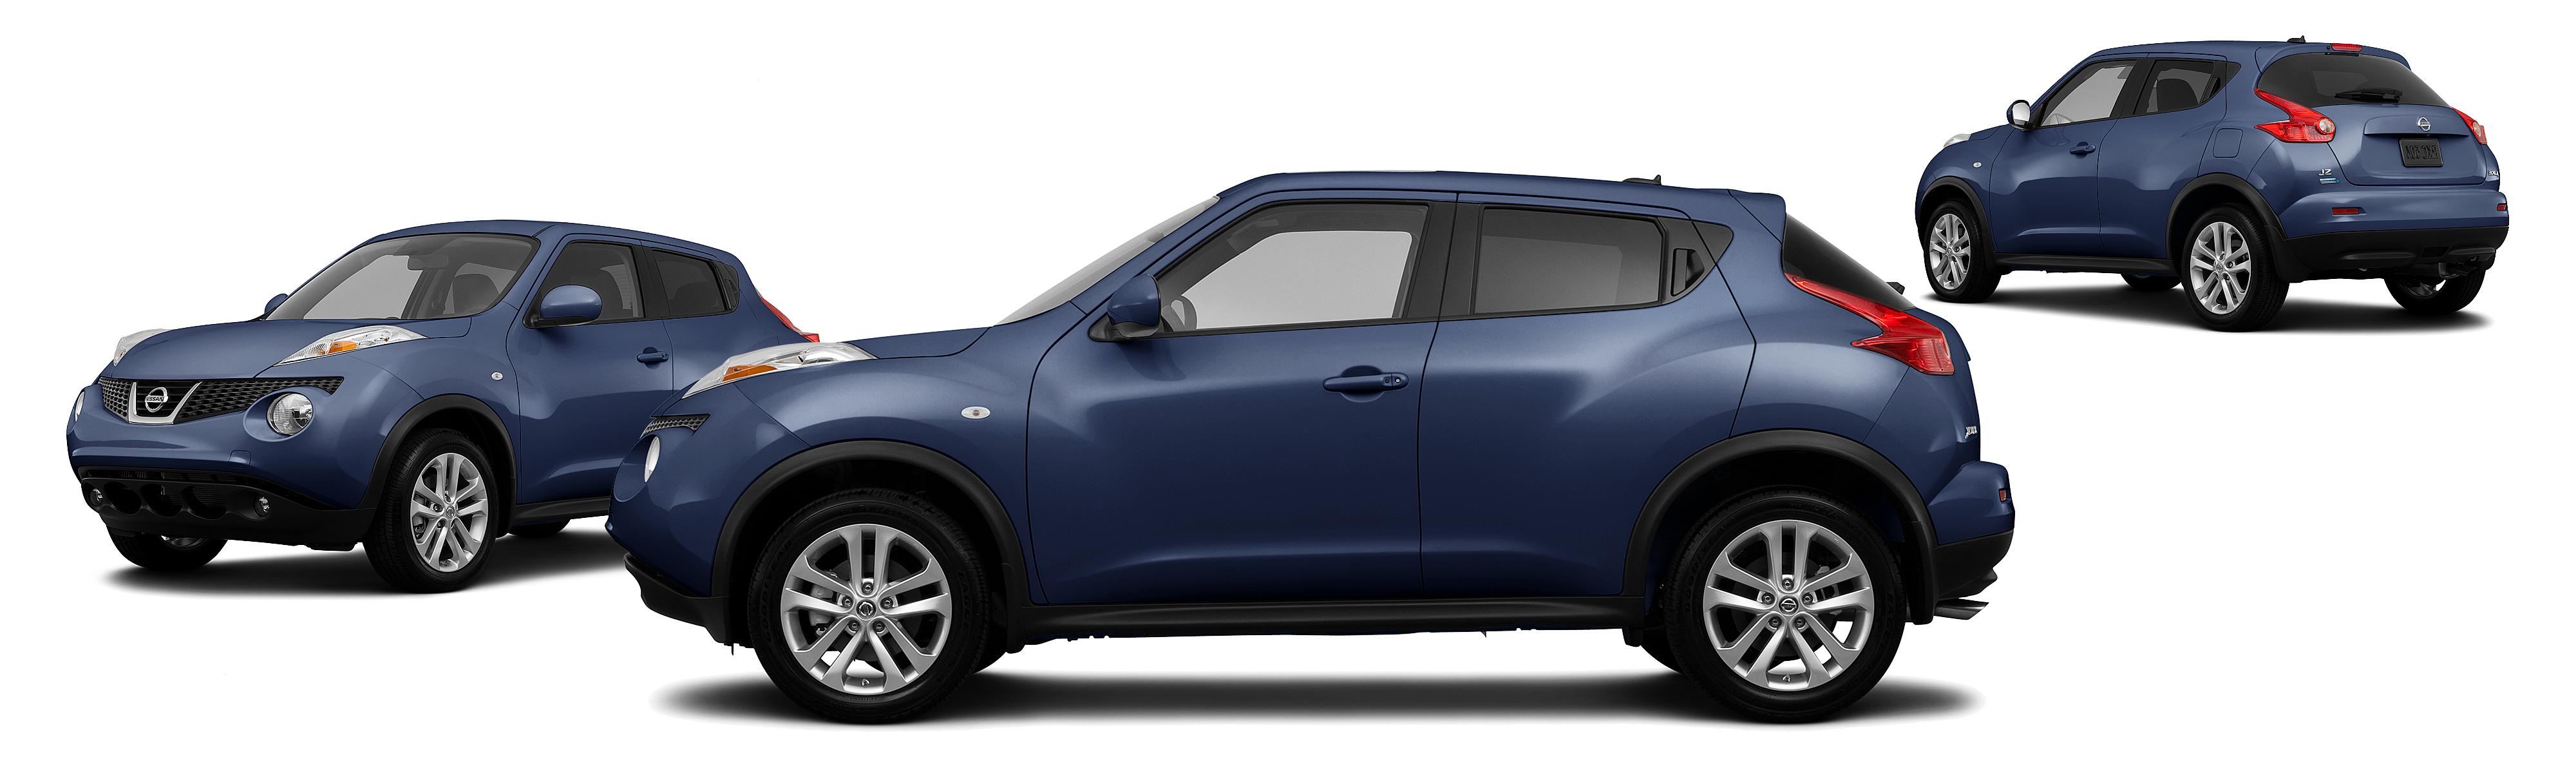 2013 Nissan JUKE SL 4dr Crossover 6M - Research - GrooveCar